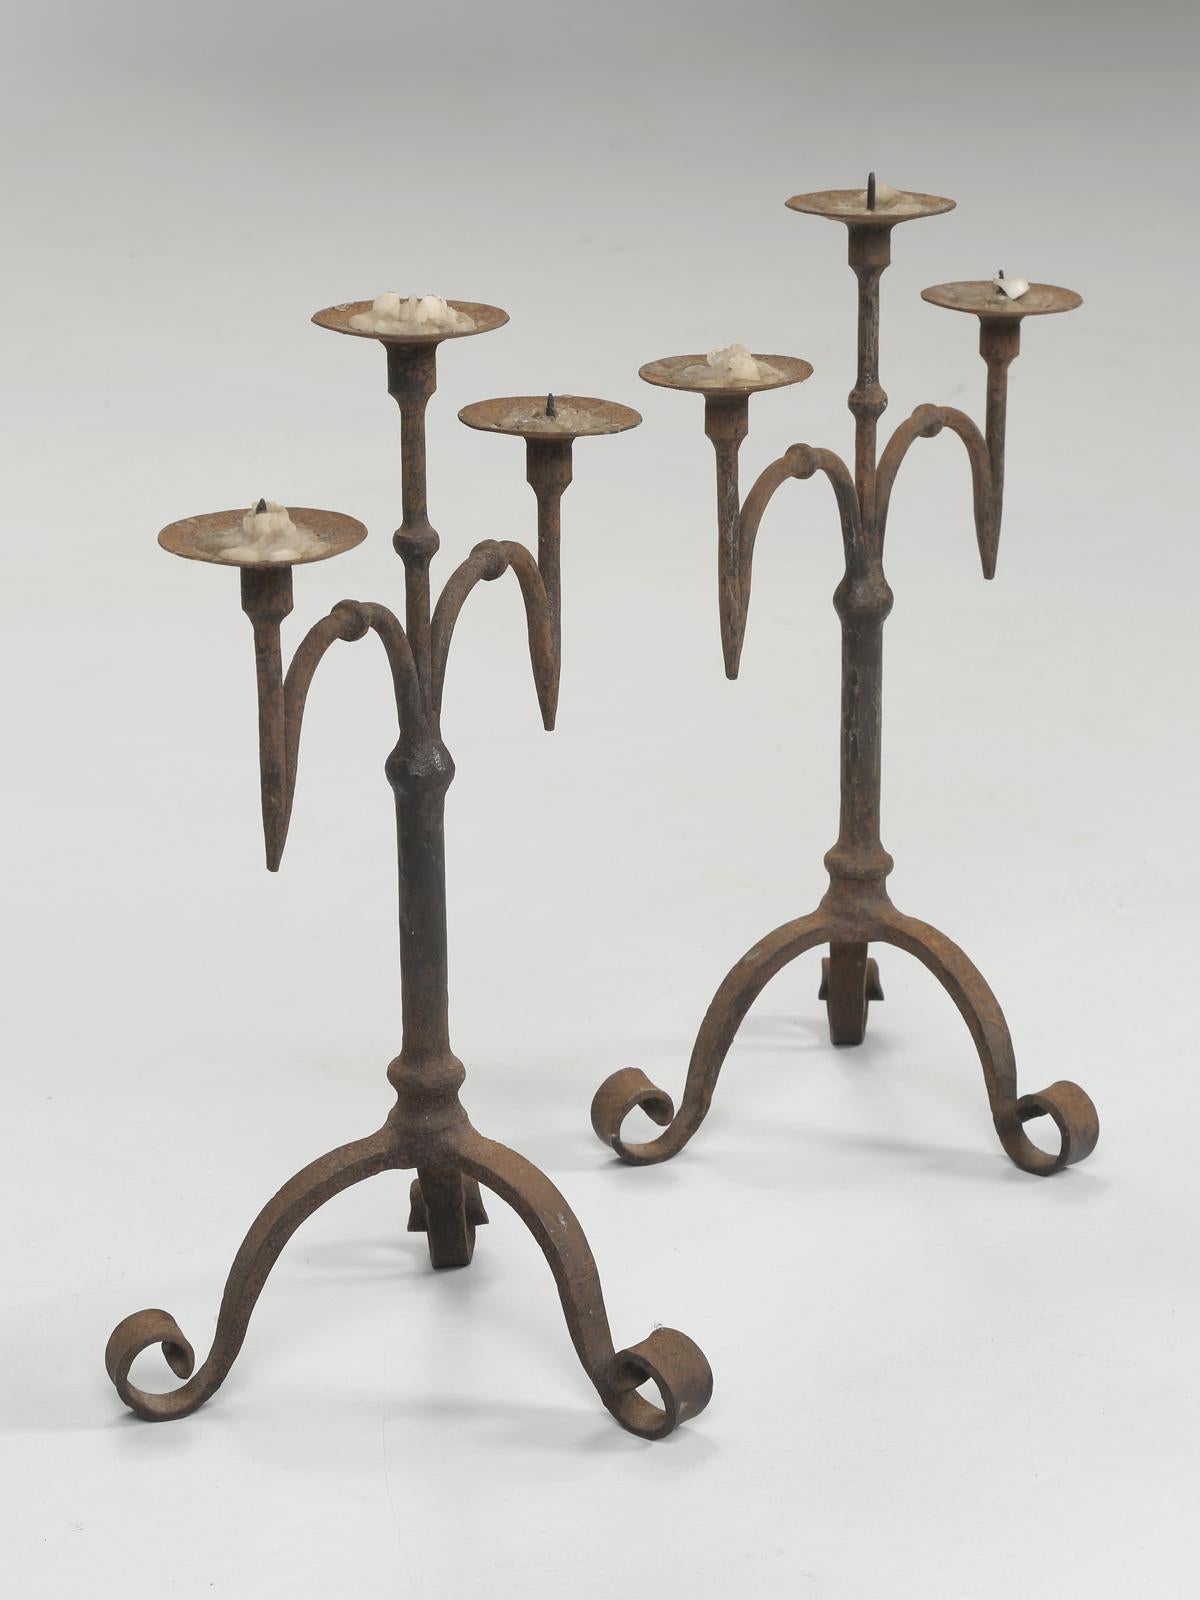 There are a few items that are very difficult to pin a date on and this unusual pair of wrought iron candlesticks is a perfect example. What we do know, is that they were recently removed from a Chateau located in the Hills above Cannes in the south